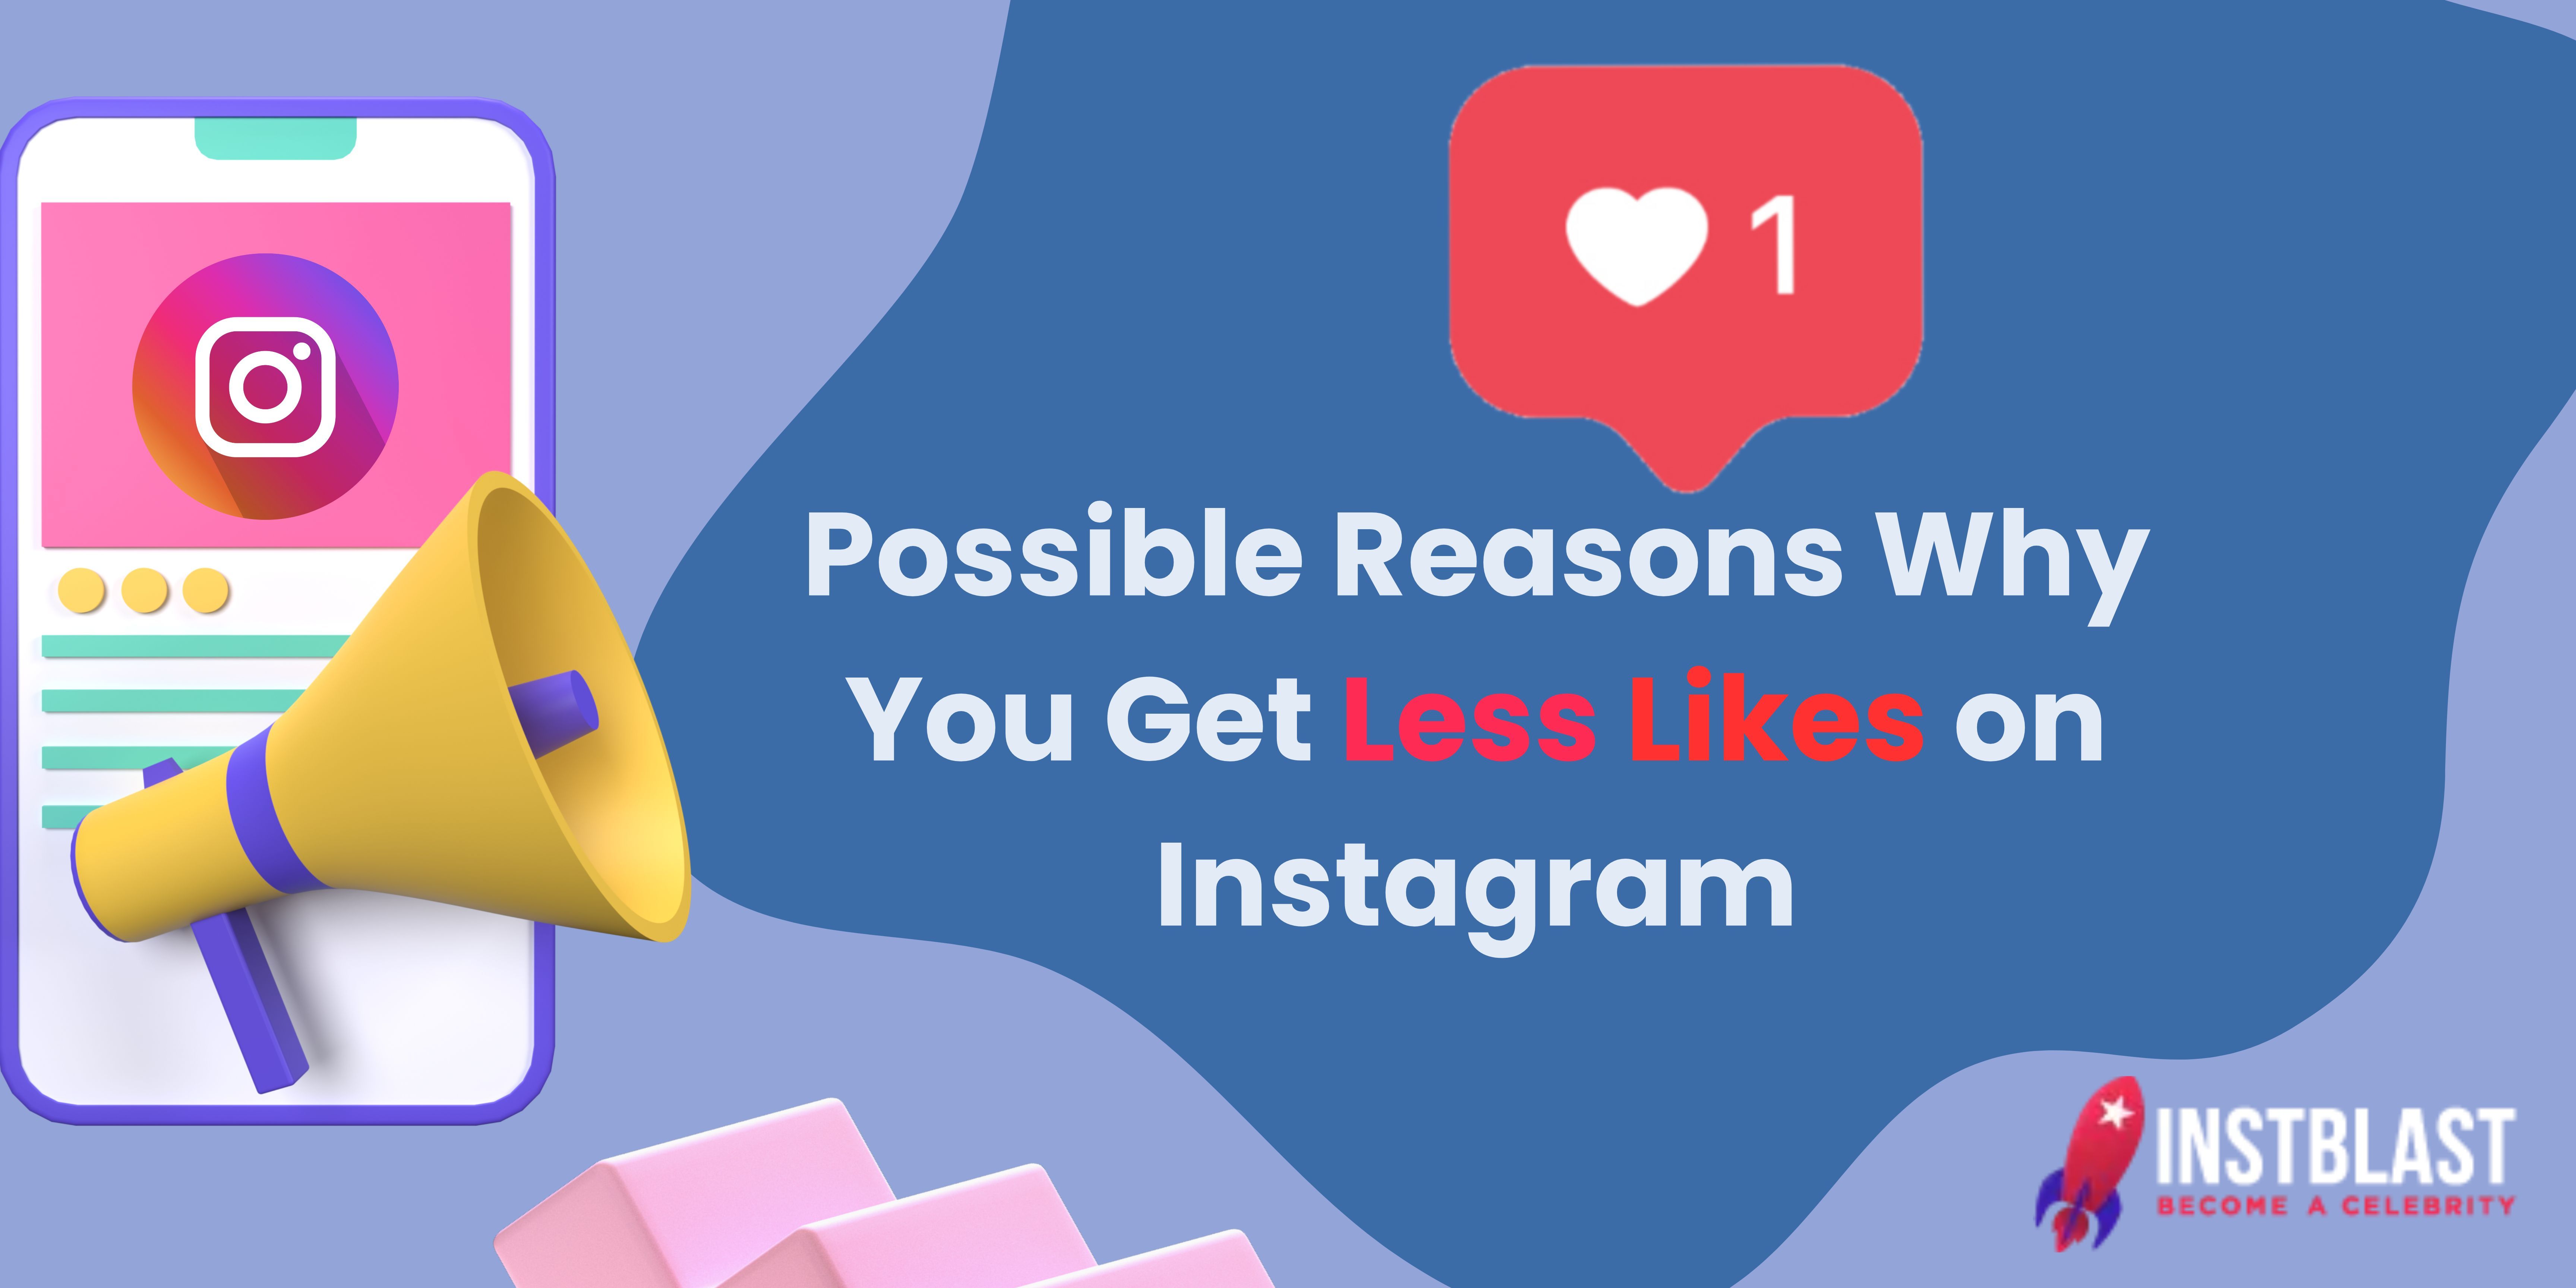 Possible Reasons Why You Get Less Likes on Instagram